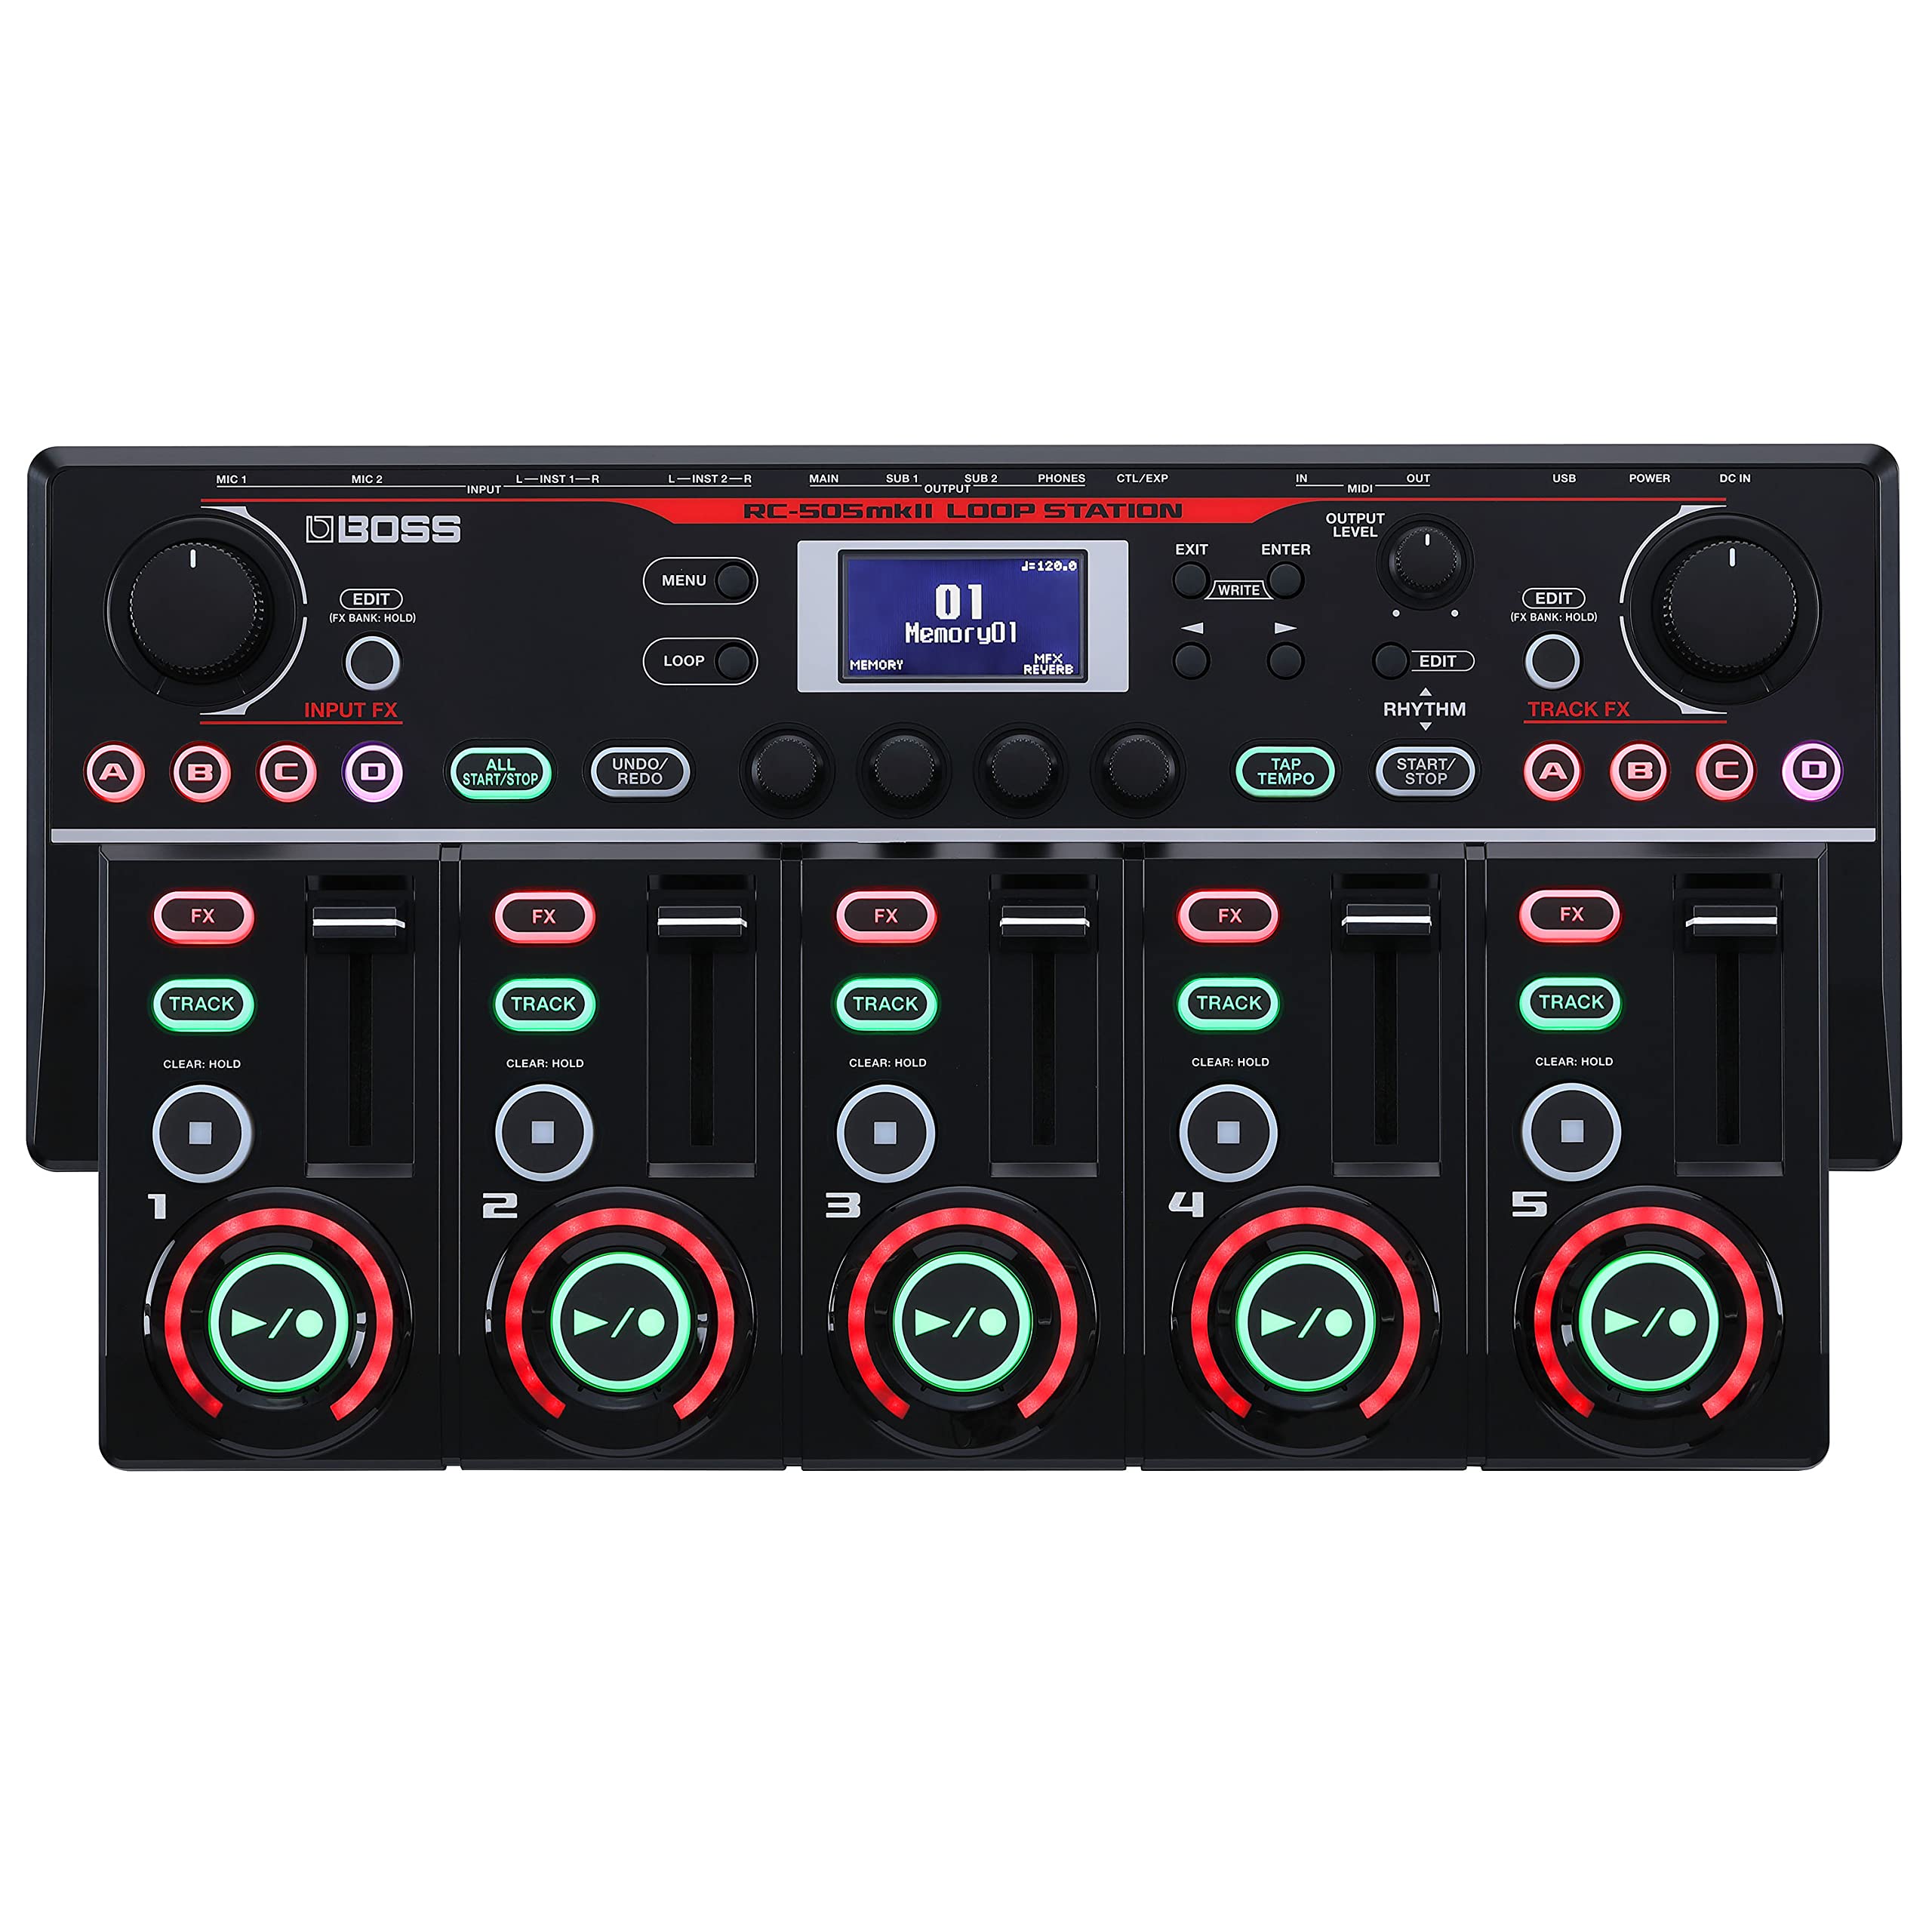 Boss RC-505MKII Loop Station – The Industry Standard Tabletop Looper, Updated and Enhanced. Class-leading sound quality. Five simultaneous stereo phrase tracks. Input FX and Track FX sections.